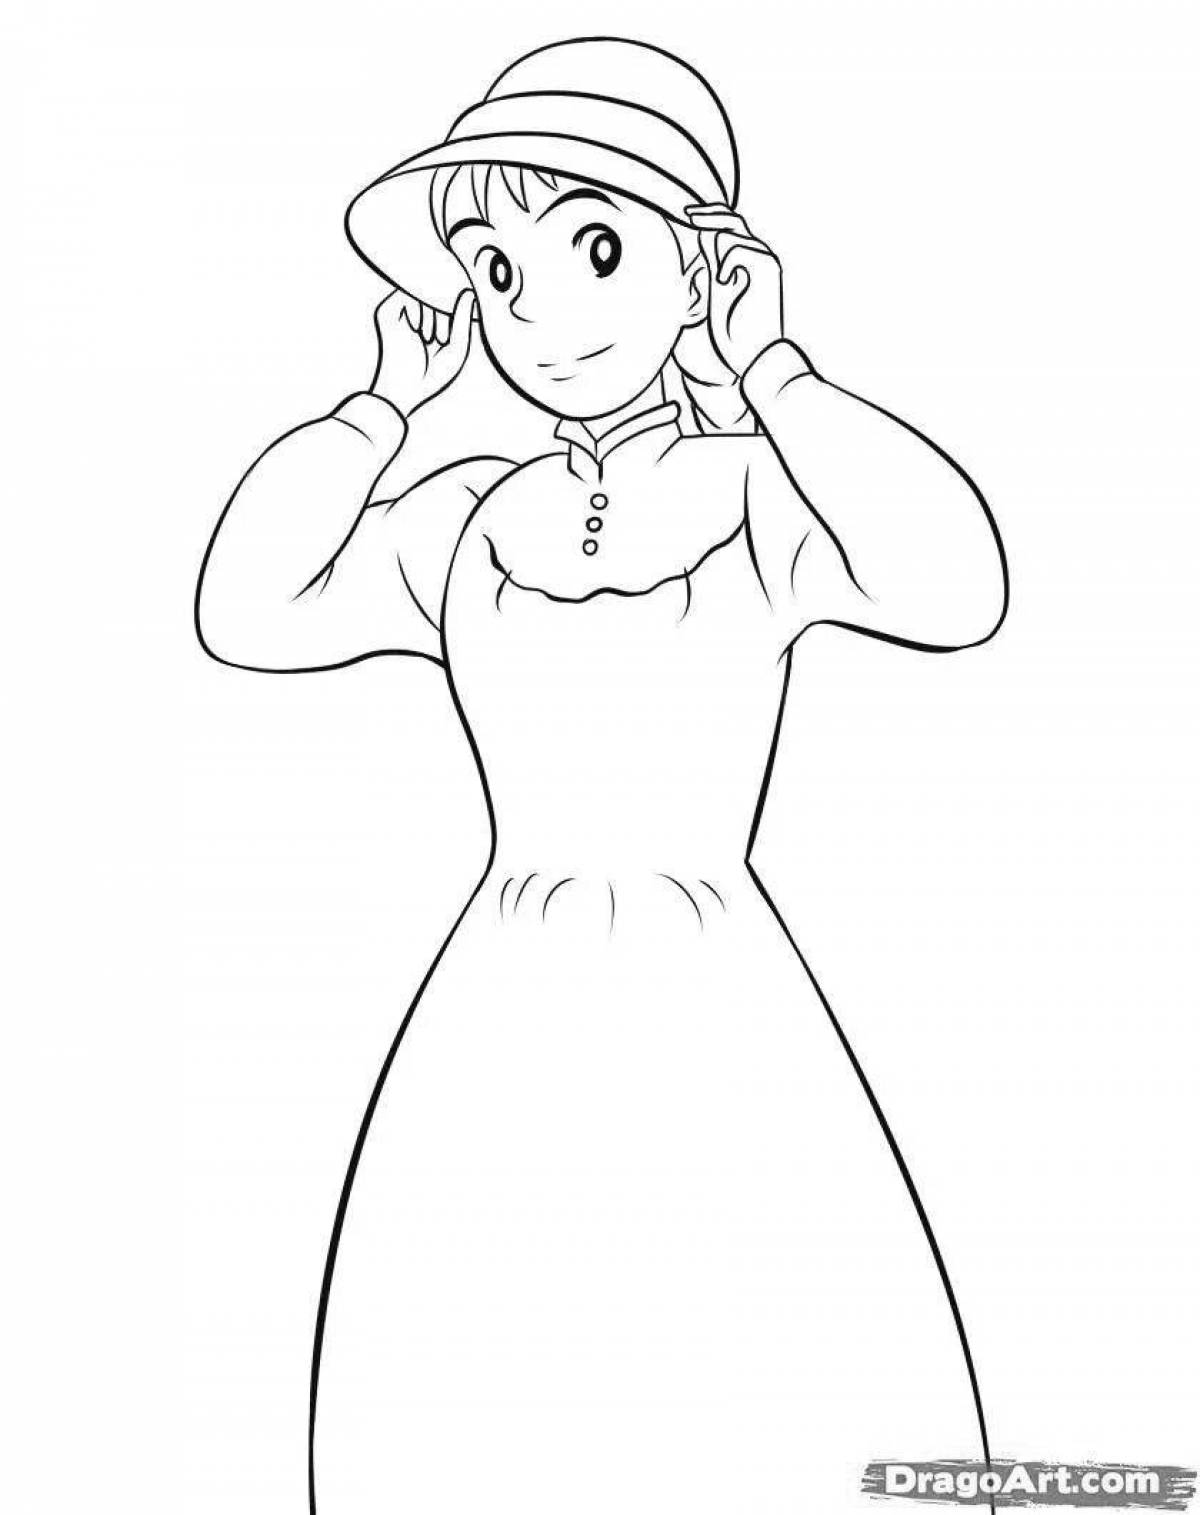 Dazzling moving castle coloring page